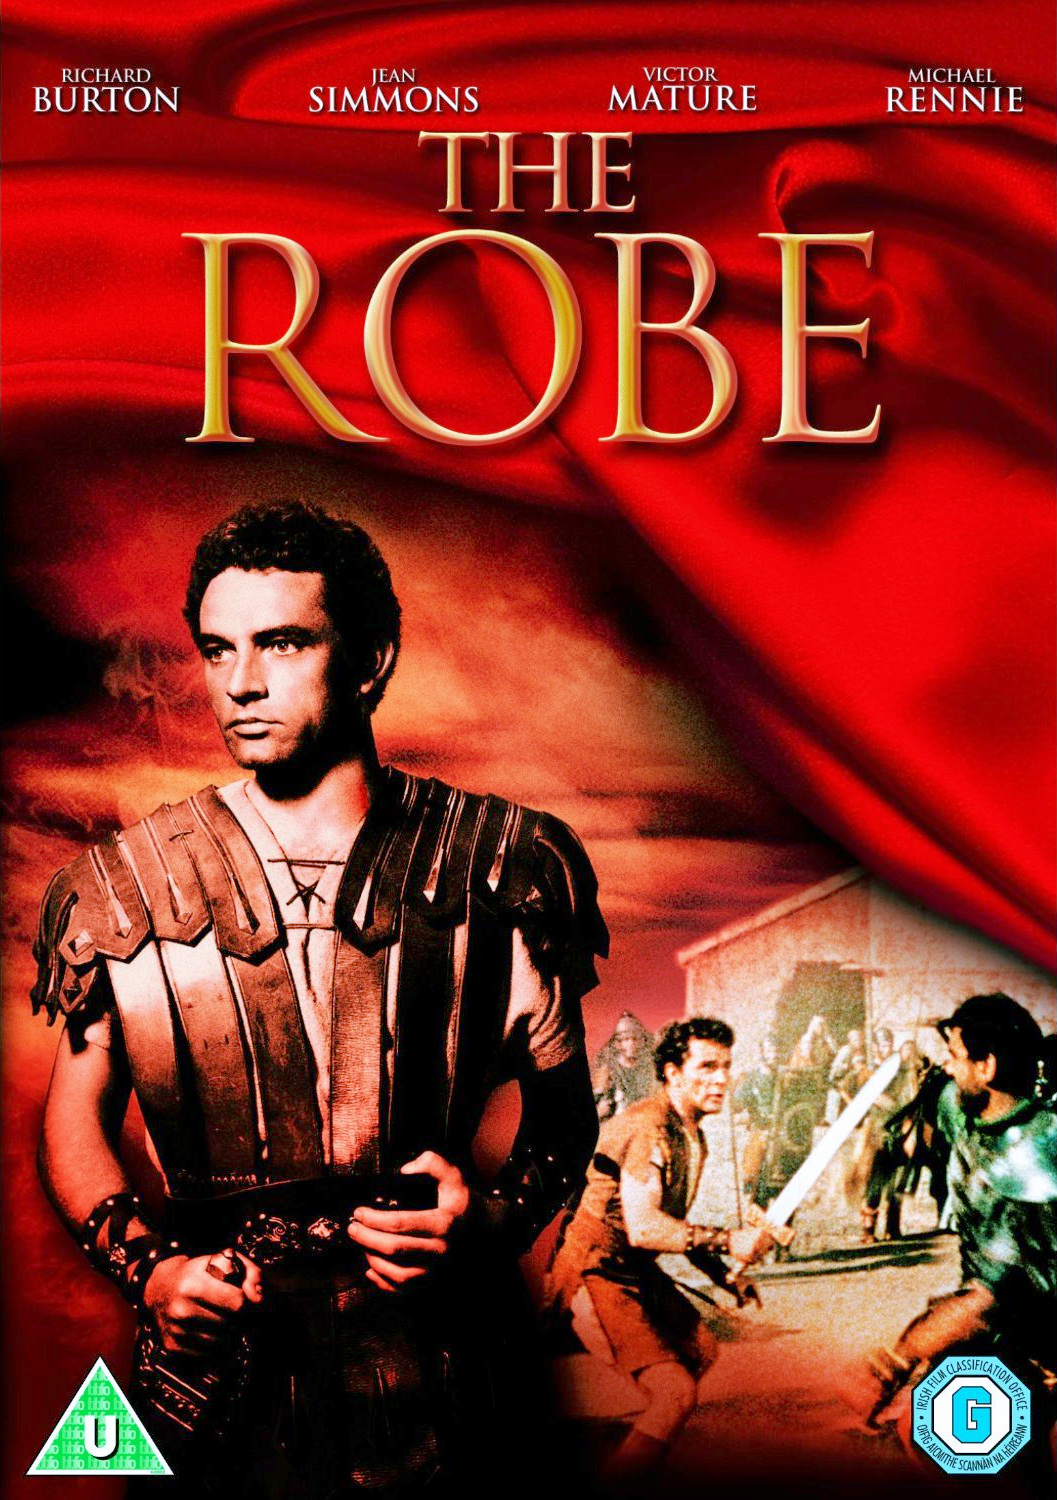 The Robe DVD from 20th Century Fox, 2012